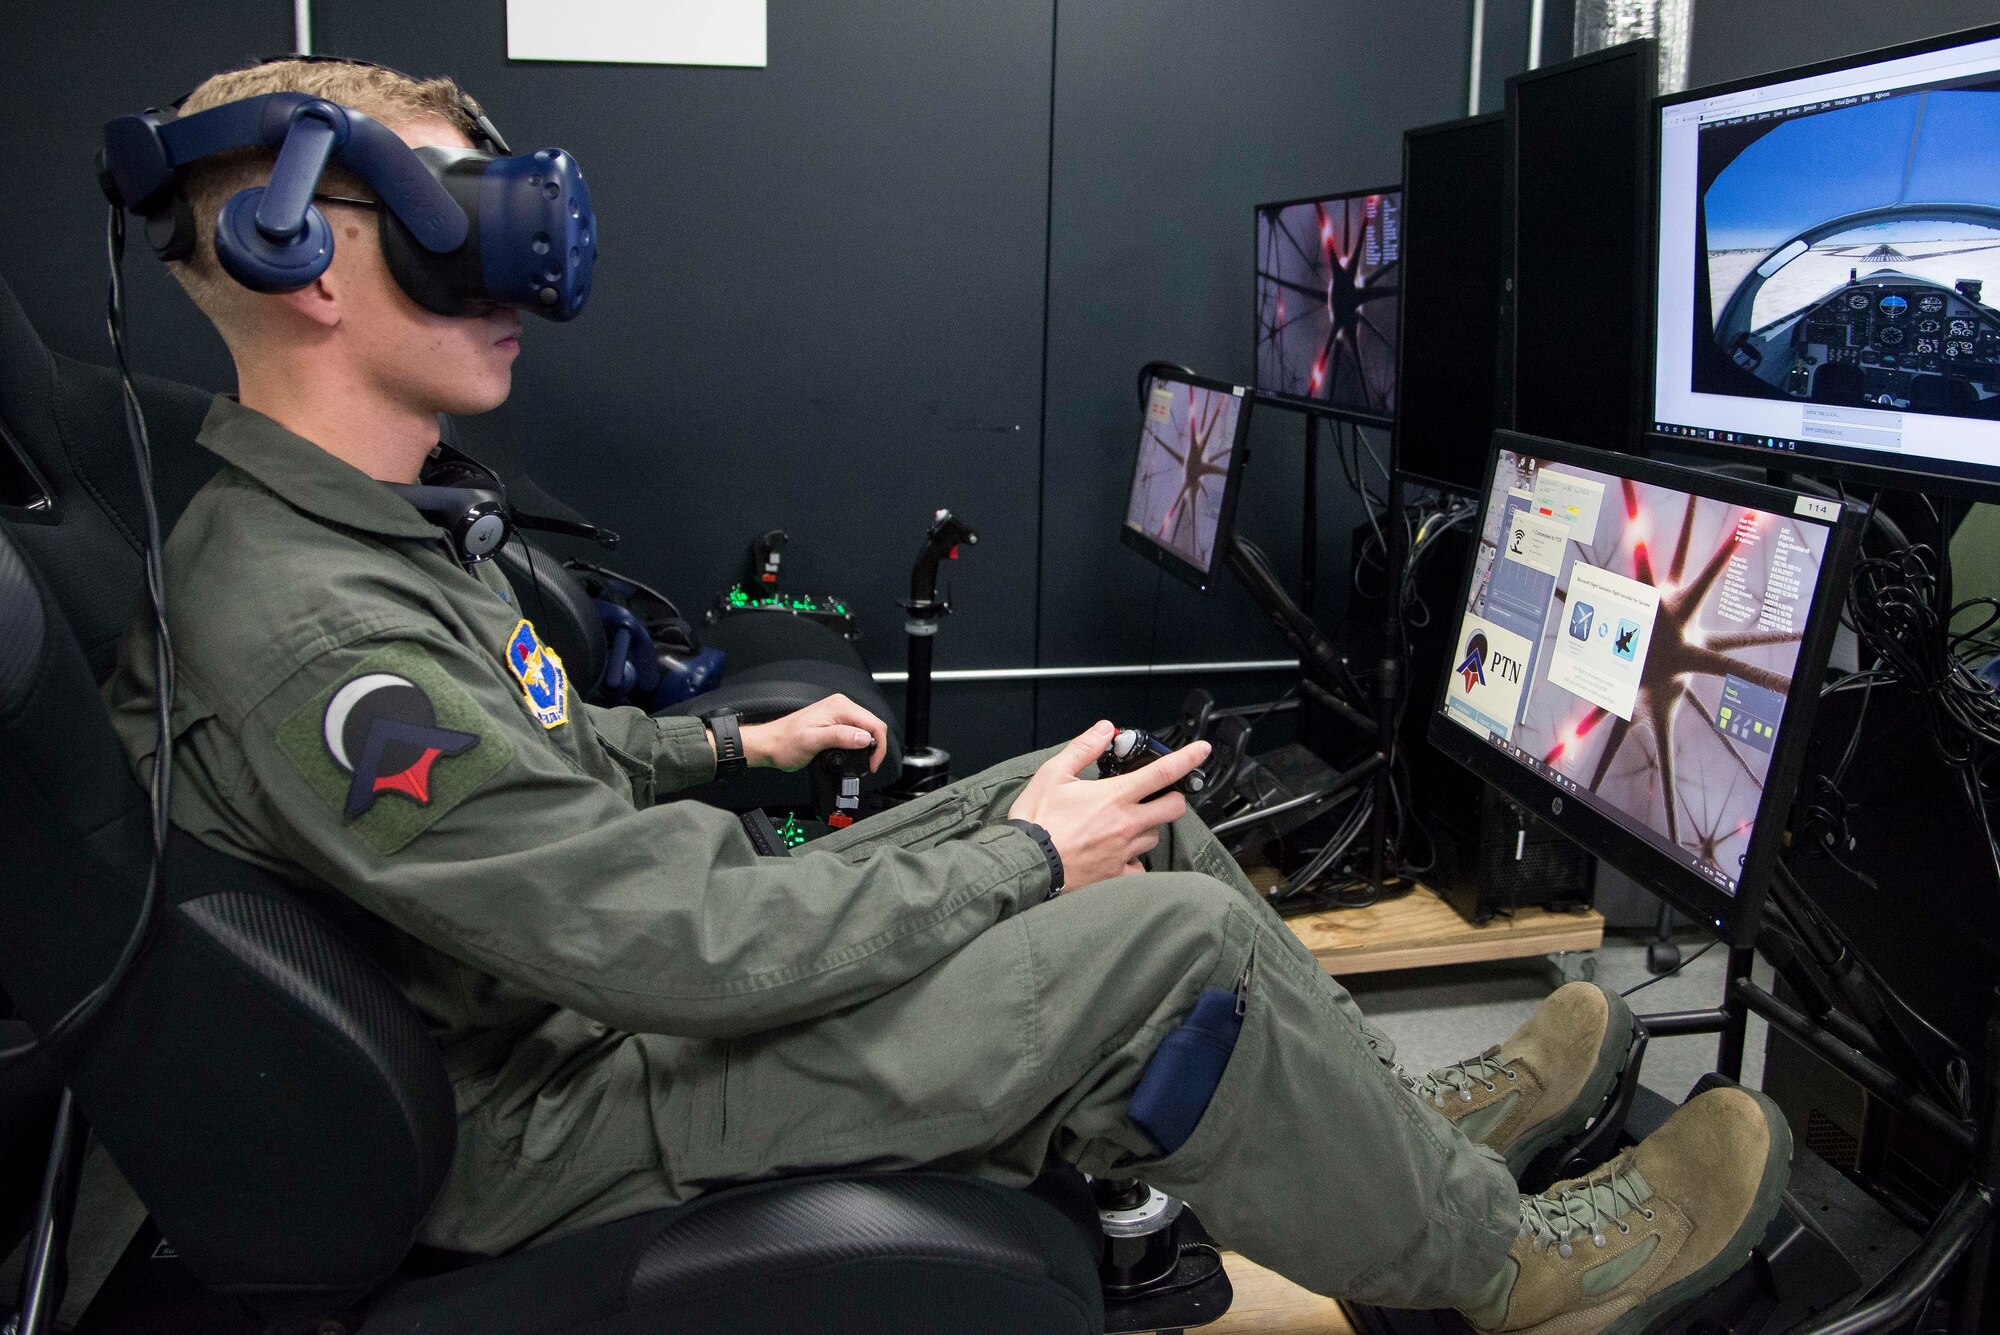 Airman First Class Shane Stewart, Pilot Training Next student, trains on a virtual reality flight simulator at the Armed Forces Reserve Center in Austin, Texas, Feb. 5, 2019. The instruction in this second version is shaped from the success of and lessons learned from the first PTN program, where 13 officers graduated in June 2018 and progressed to advanced training across multiple platforms. (U.S. Air Force photo by Sean M. Worrell)